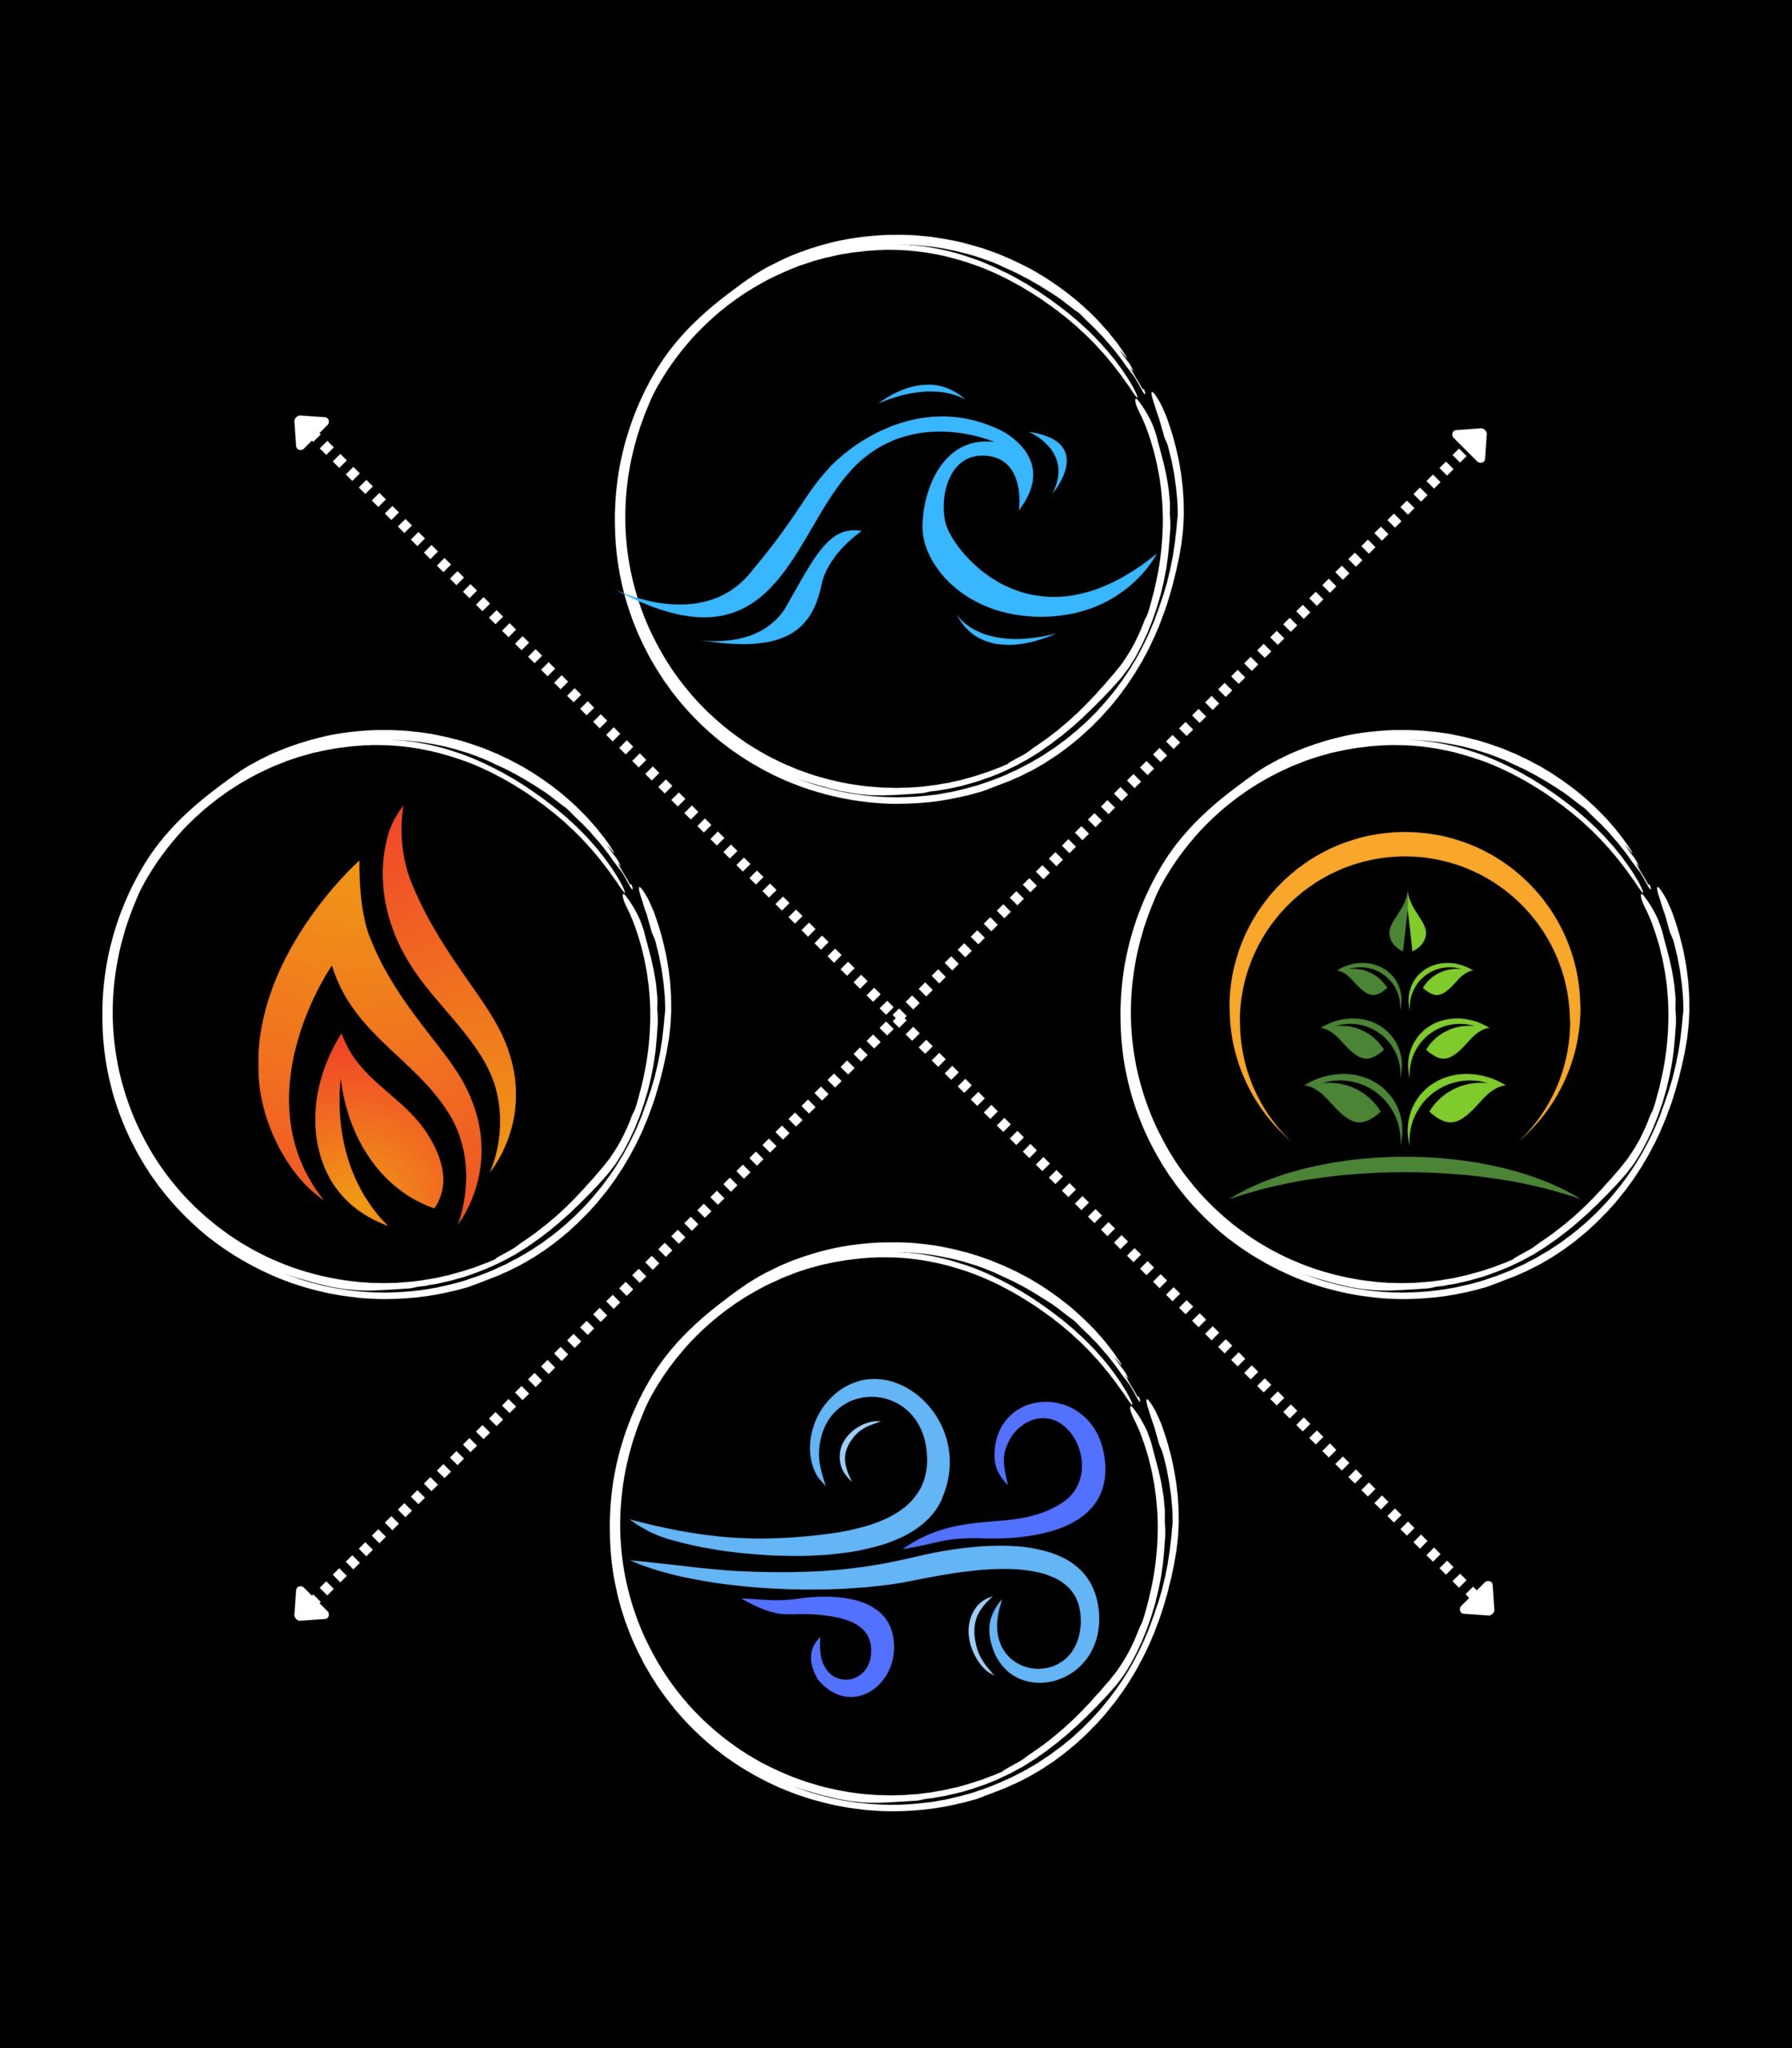 Bringing yourself back to balance using the Four Elements